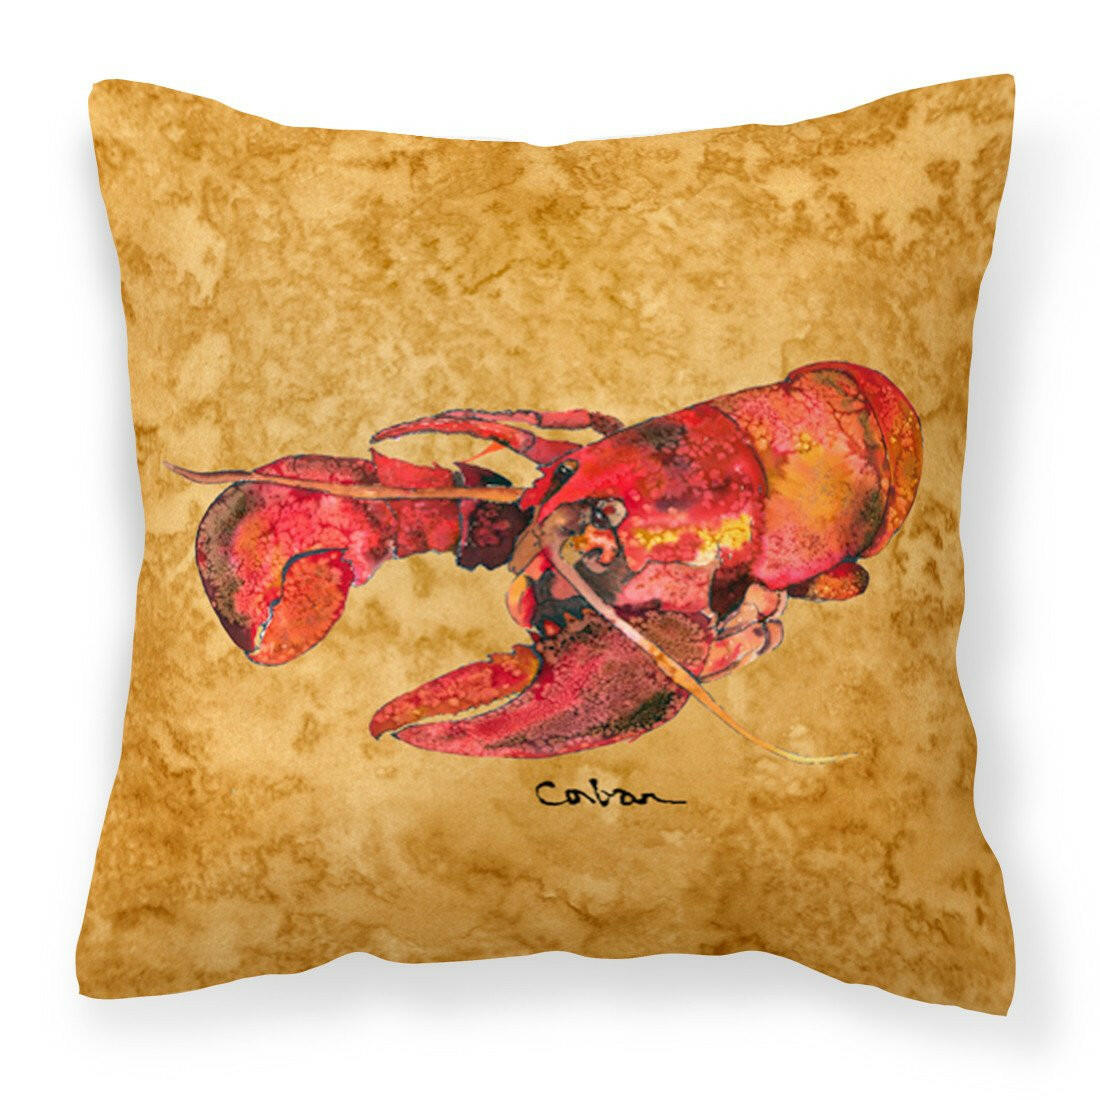 Lobster Fabric Decorative Pillow 8715PW1414 - the-store.com